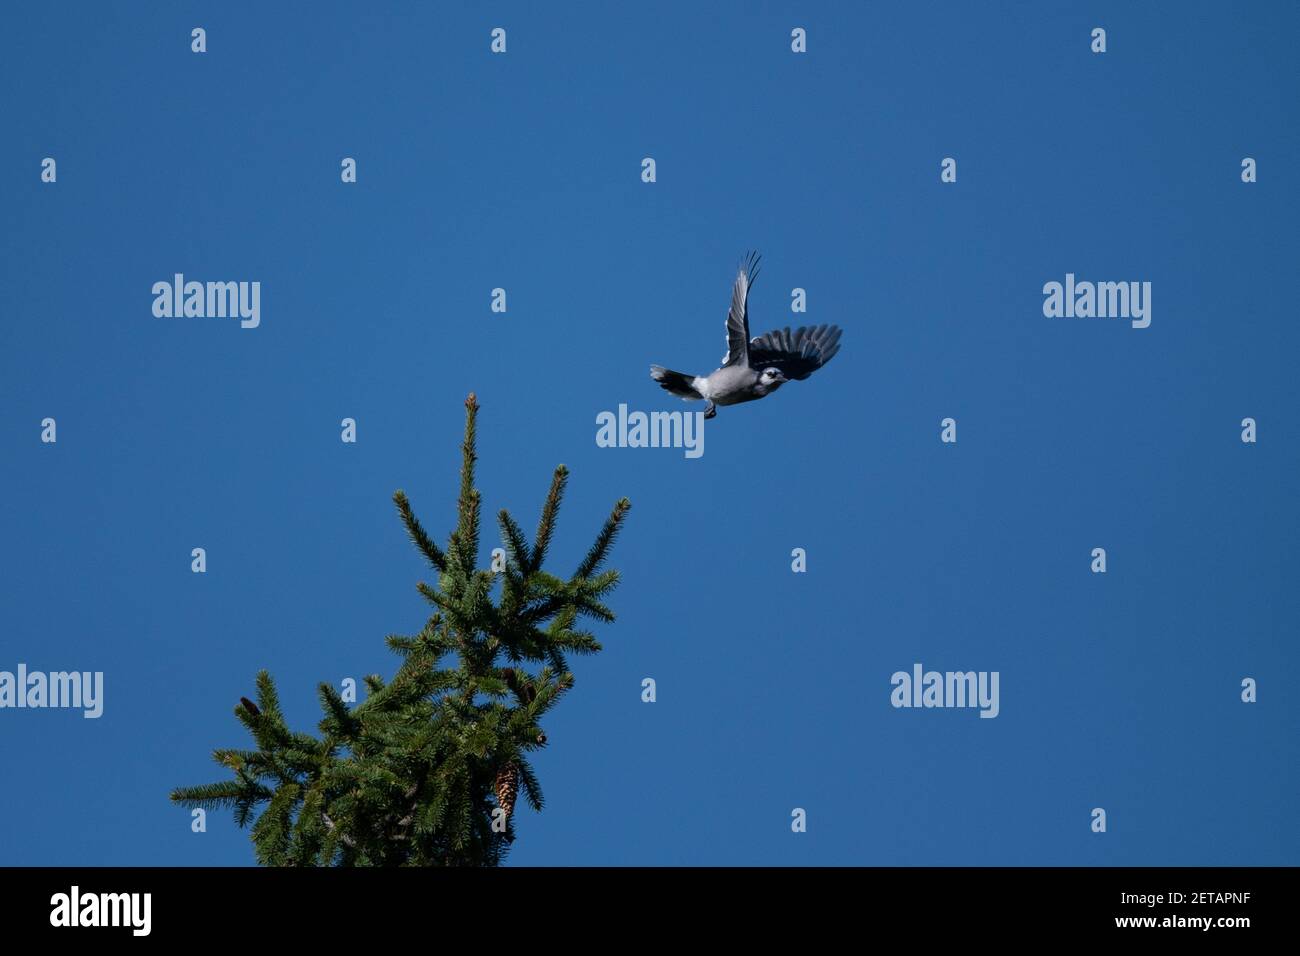 A bluejay flies away from the top of a pine tree. Stock Photo